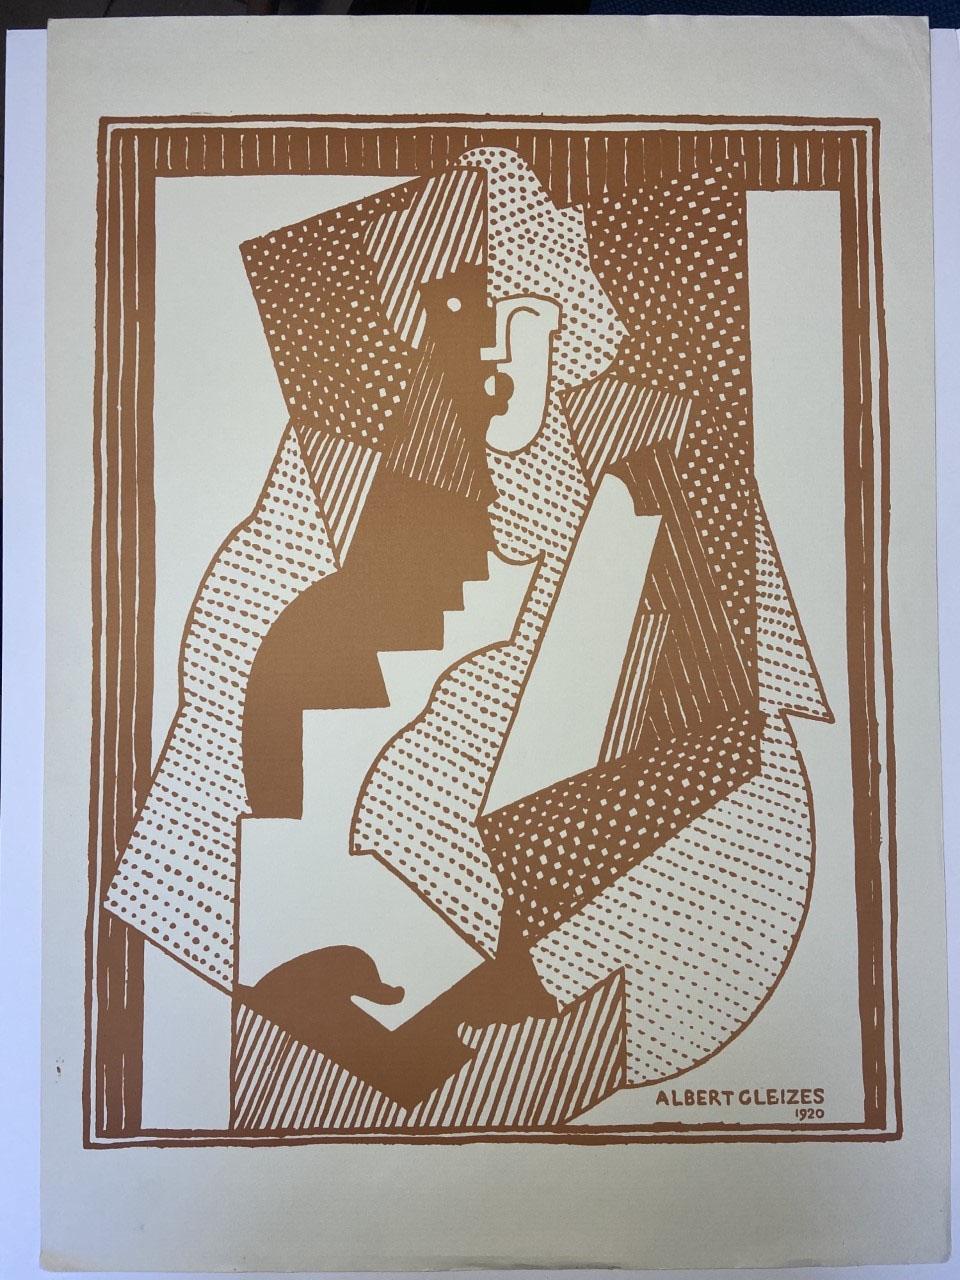 Albert Gleizes  
print 1920  
Orchard paper   
64 x 46 cm 
signature in the plate
290 euros